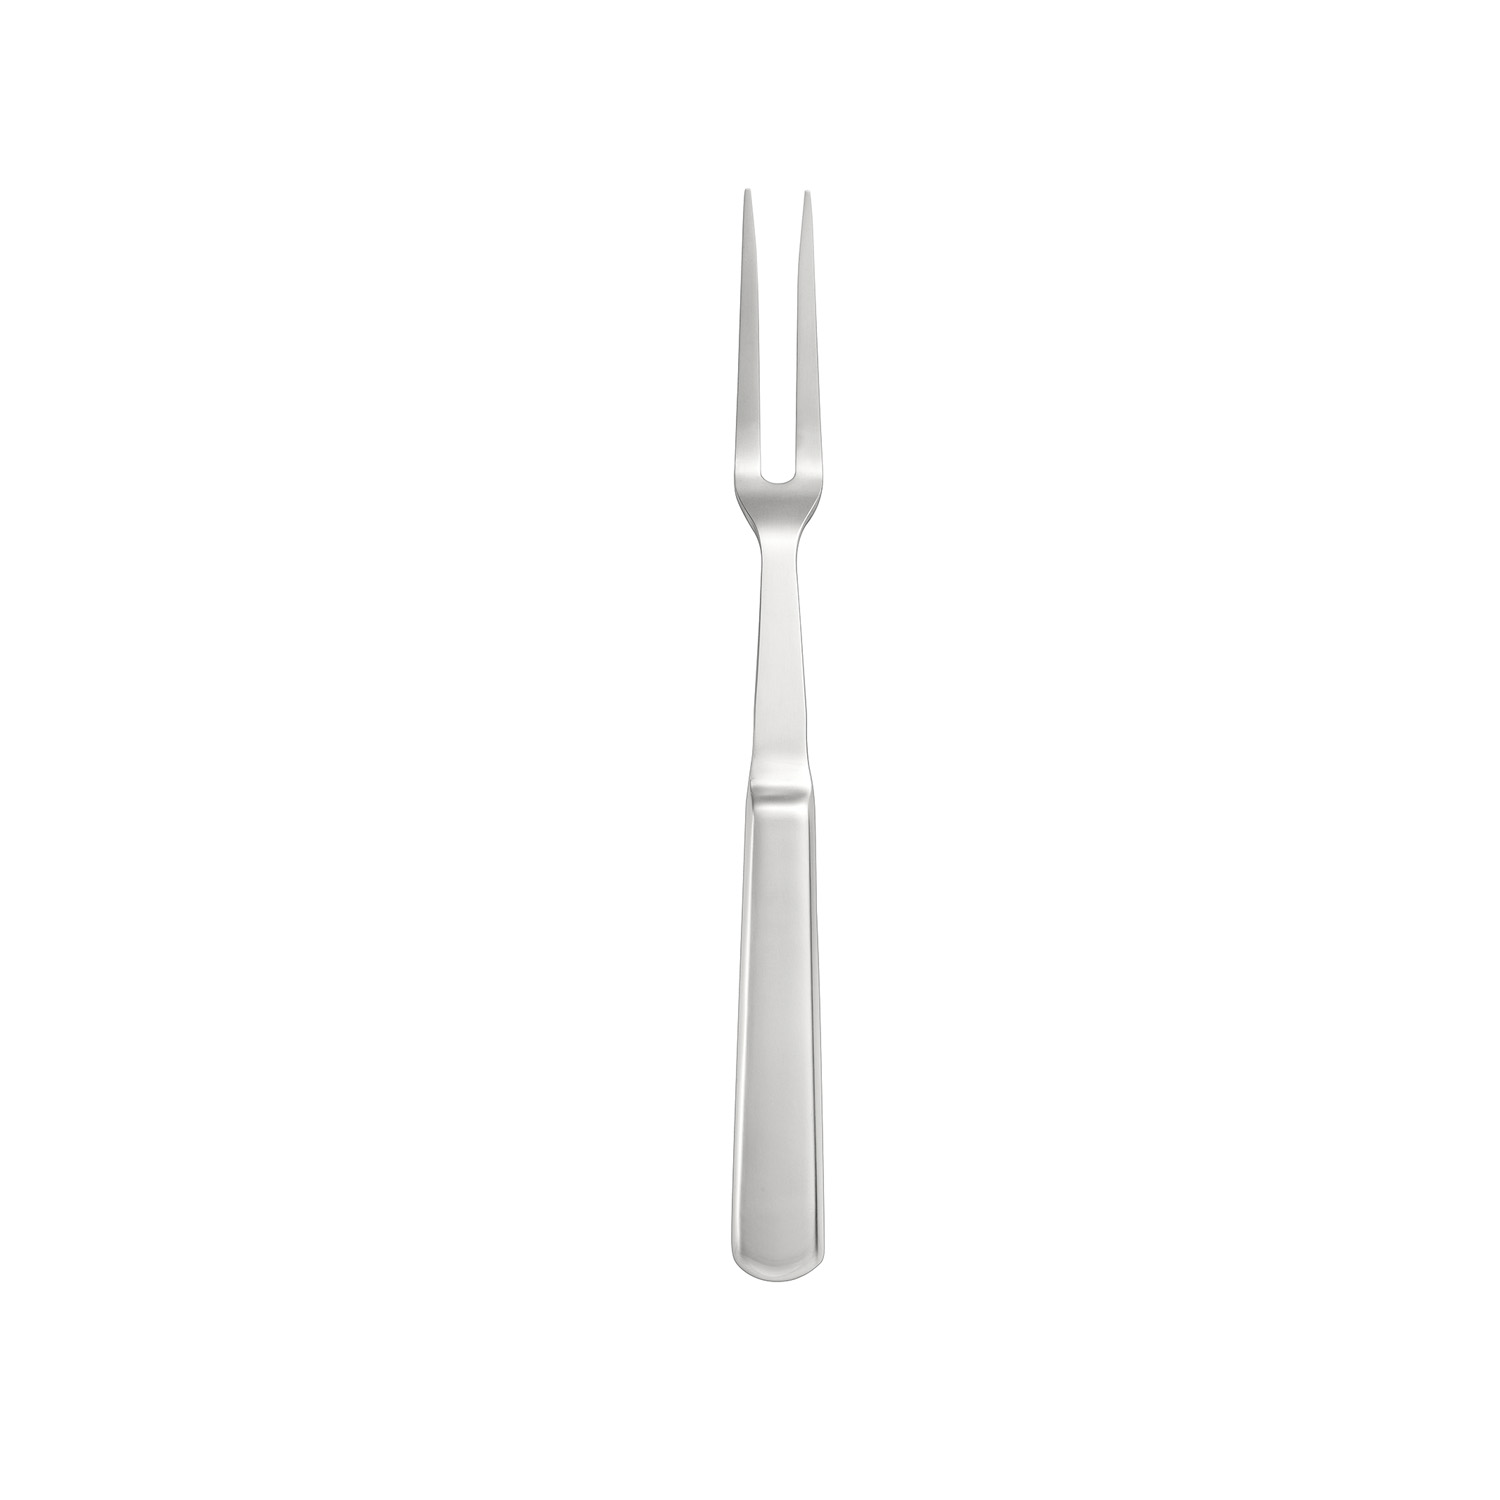 CAC China SBFH-FP04 Stainless Steel Pot Fork with Hollow Handle 11 3/8"